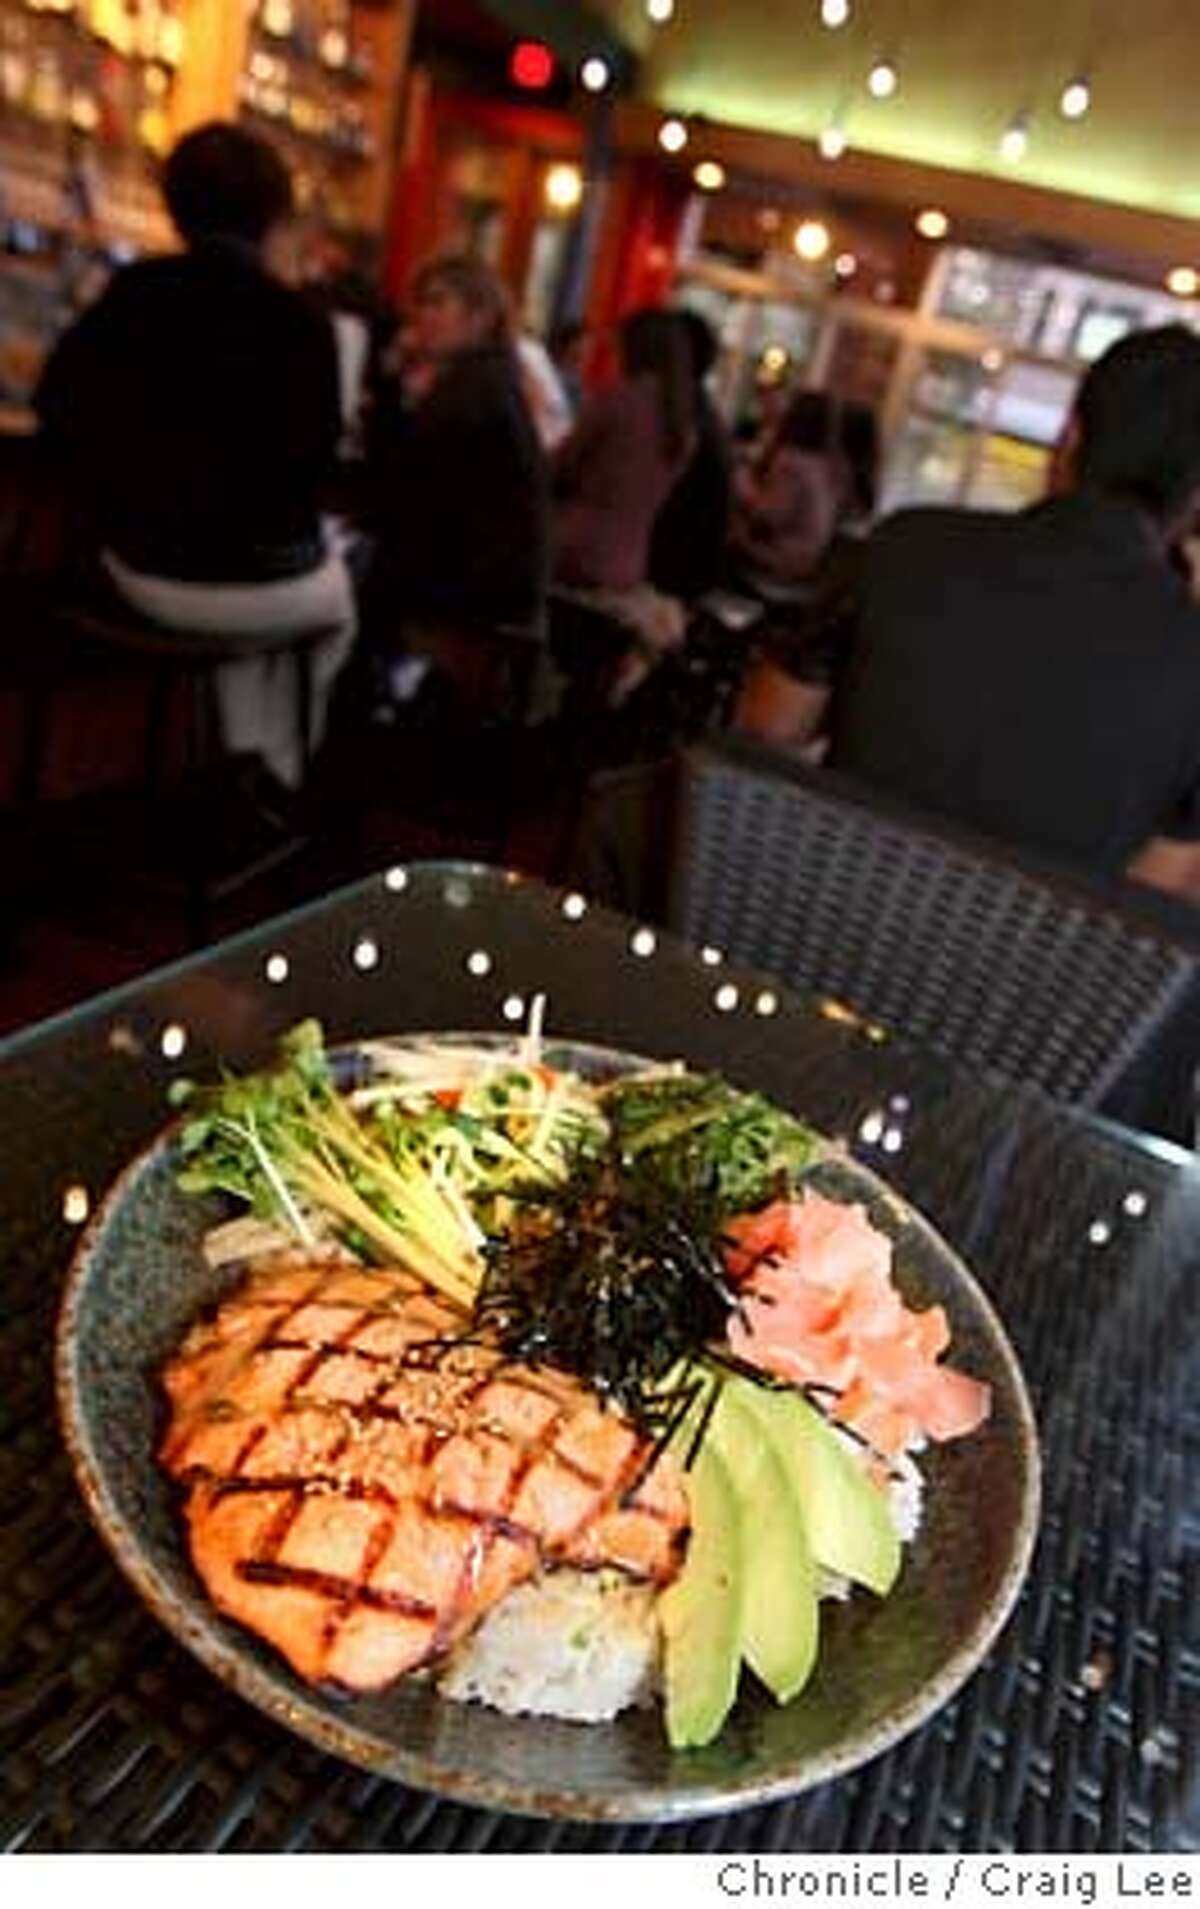 ###Live Caption:A salmon wasabi rice bowl is photographed in the bar area of the restaurant. Pacific Catch is located at 1200 Ninth Ave. in San Francisco. Photo by Brant Ward / San Francisco Chronicle###Caption History:A salmon wasabi rice bowl is photographed in the bar area of the restaurant. Pacific Catch is located at 1200 Ninth Ave. in San Francisco. Photo by Brant Ward / San Francisco Chronicle###Notes:###Special Instructions: